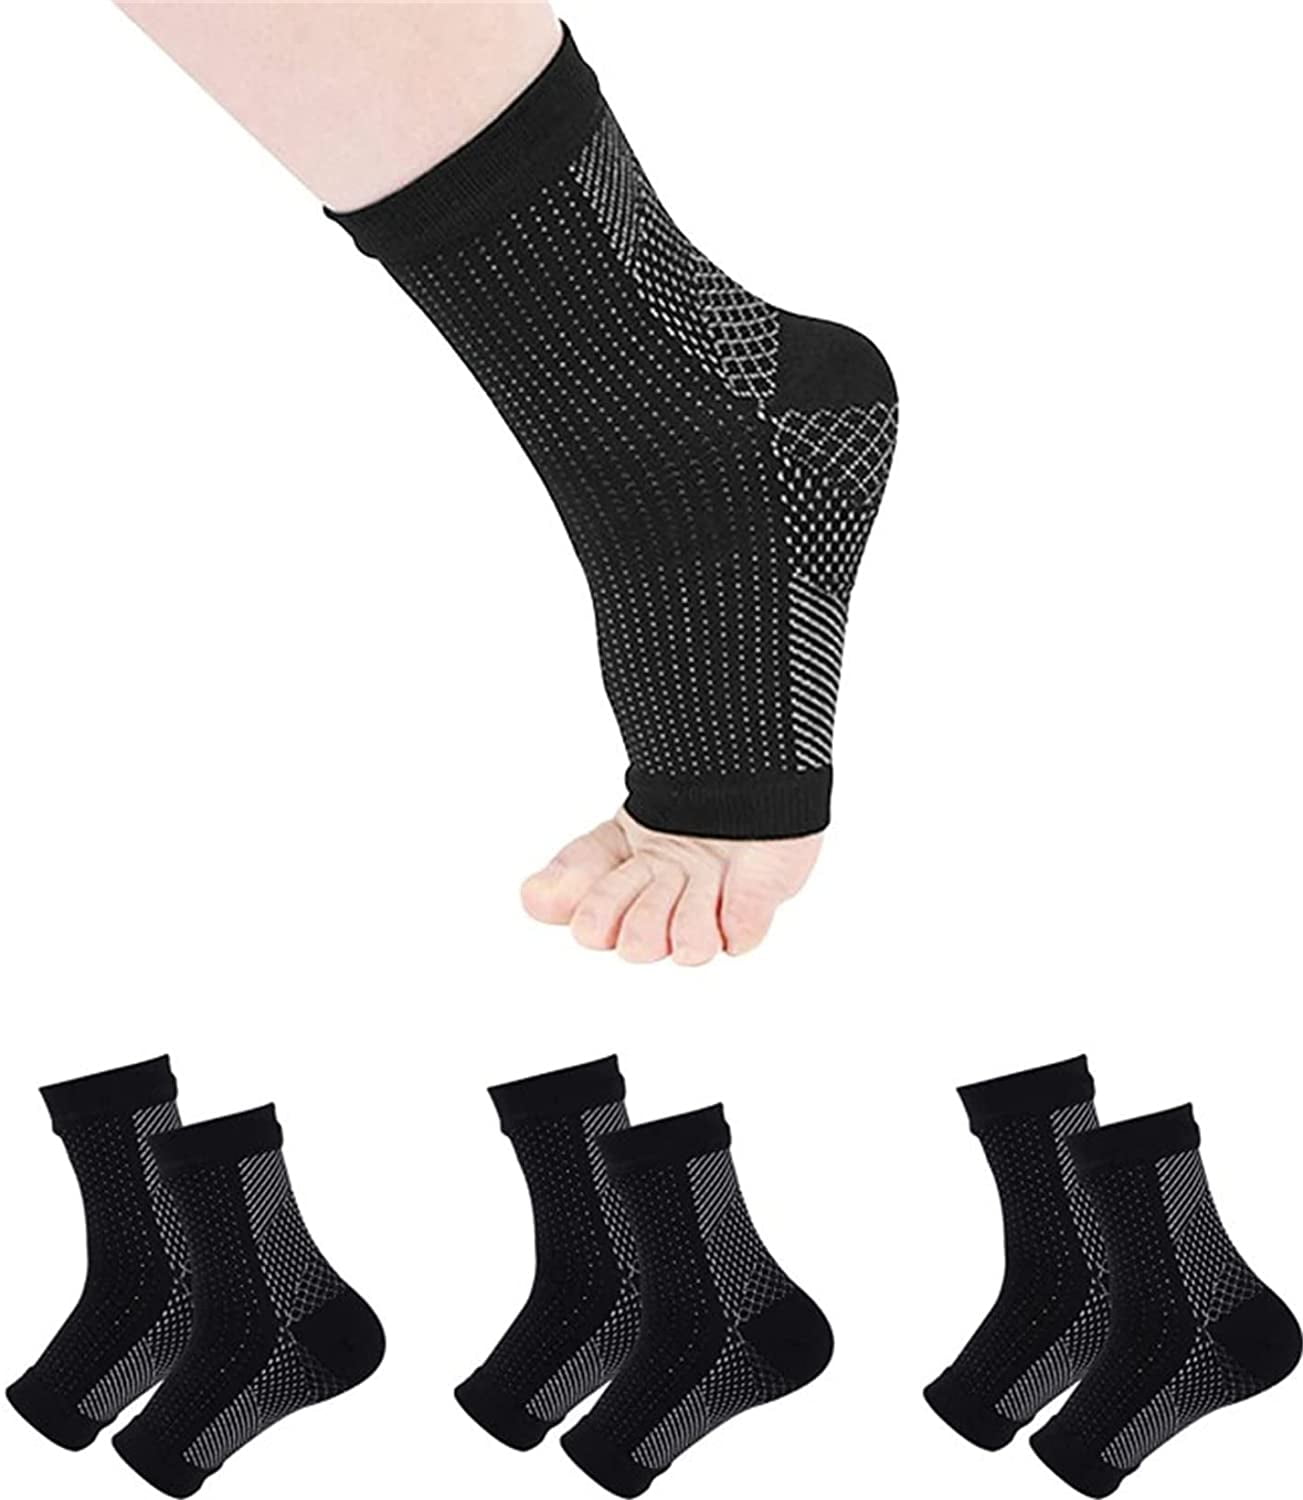 3Pairs Amrelieve Soothesocks, Soothesocks for Neuropathy, Anti Fatigue ...